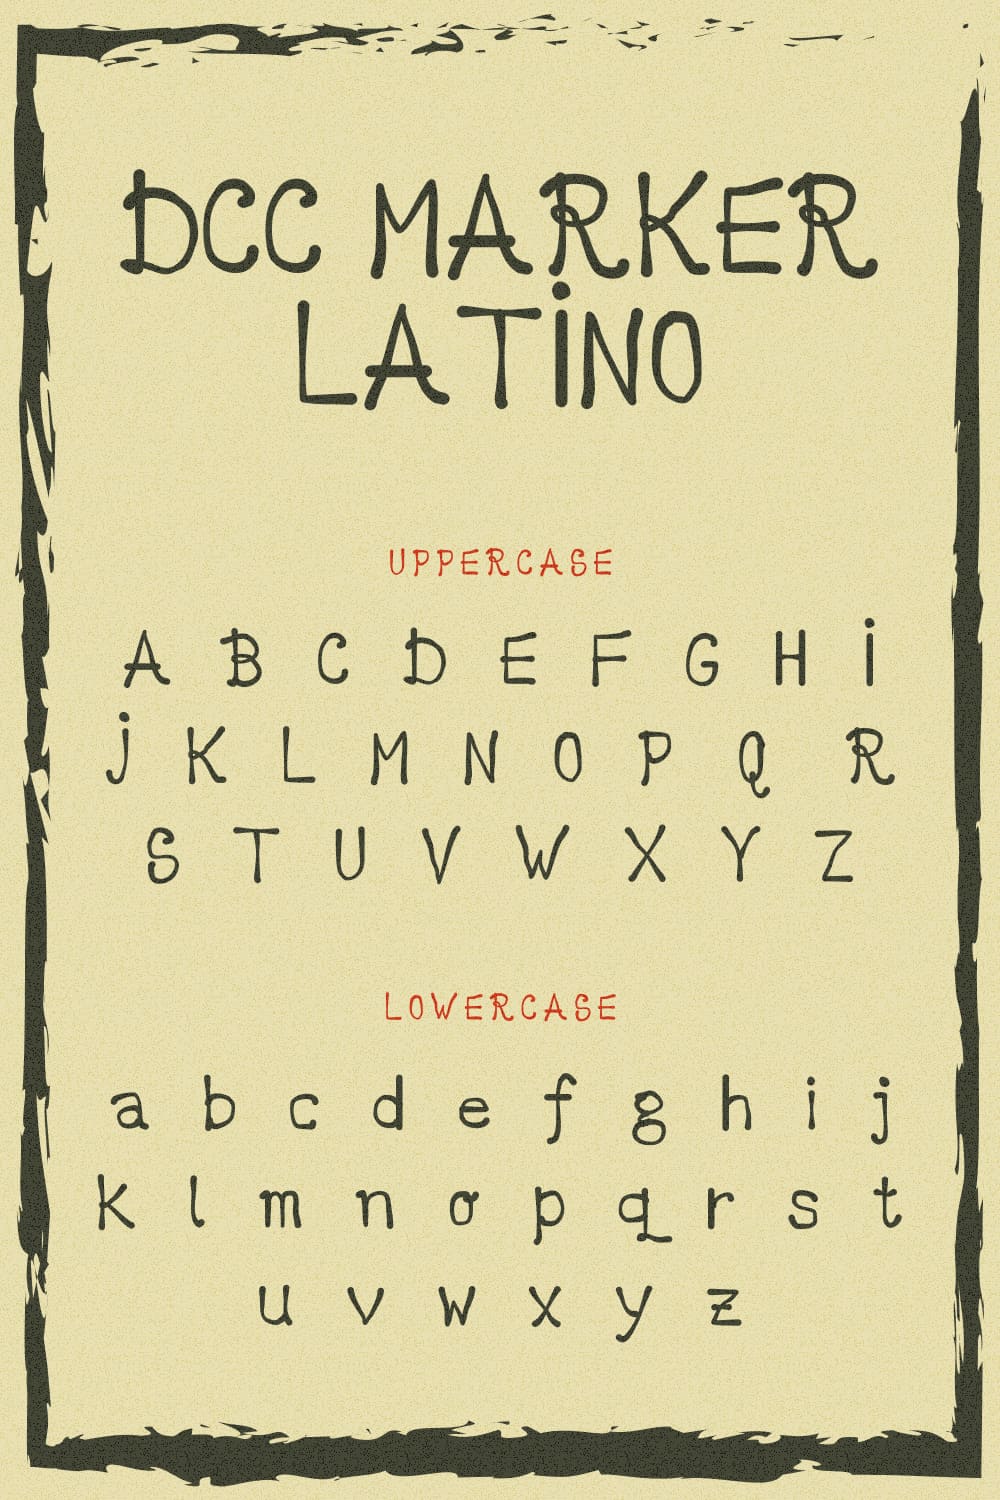 Free Mexican Font Marker Latino Pinterest uppercase and lowercase preview.